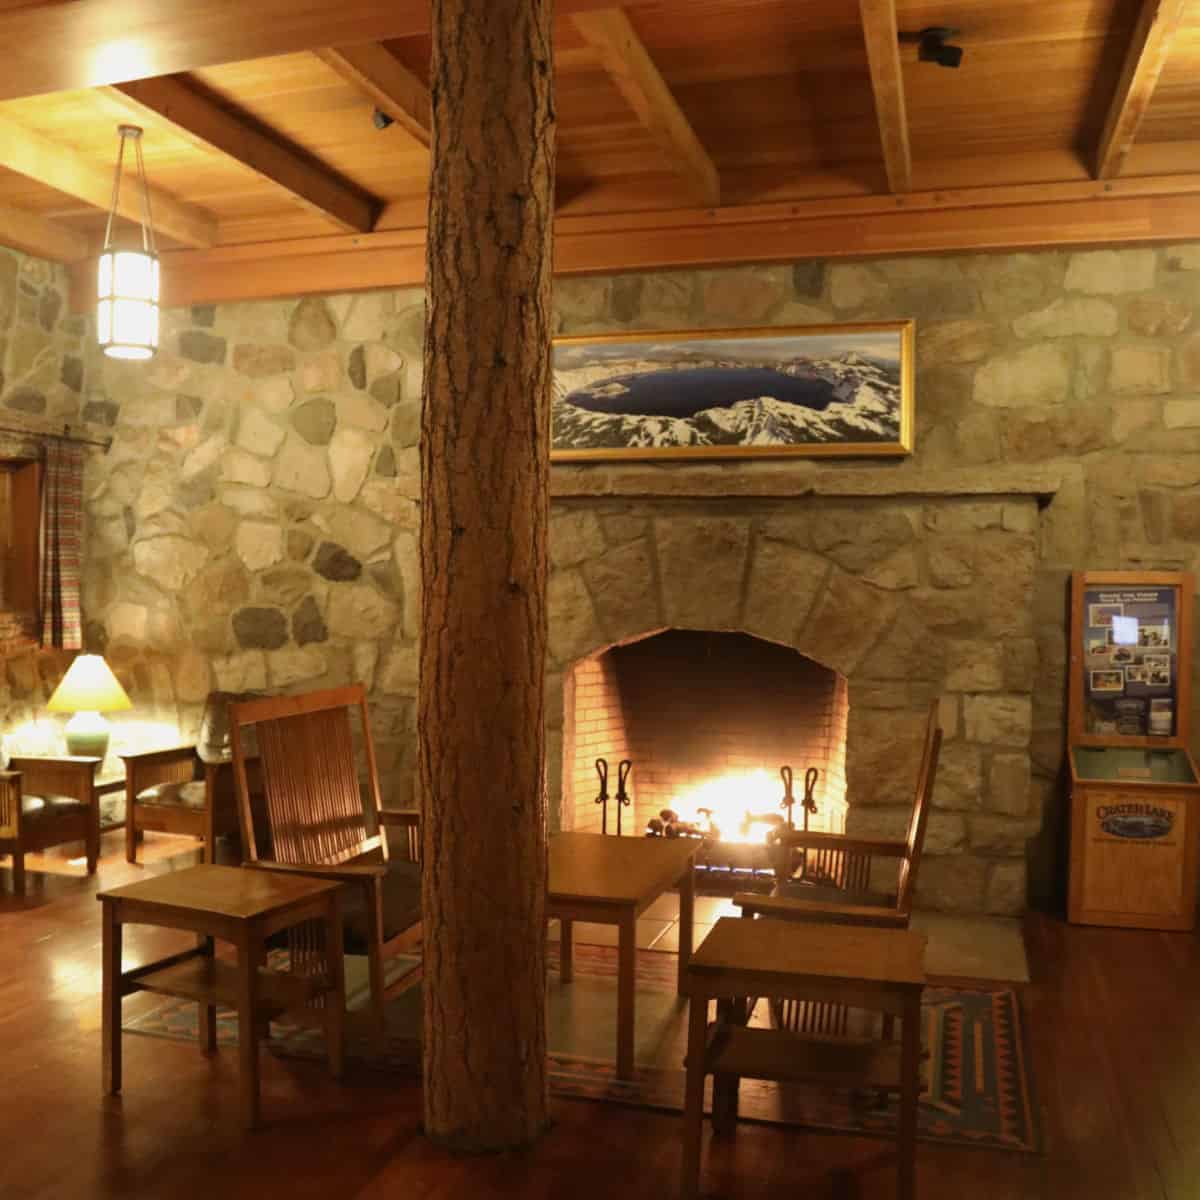 Fireplace at Crater Lake Lodge in Oregon